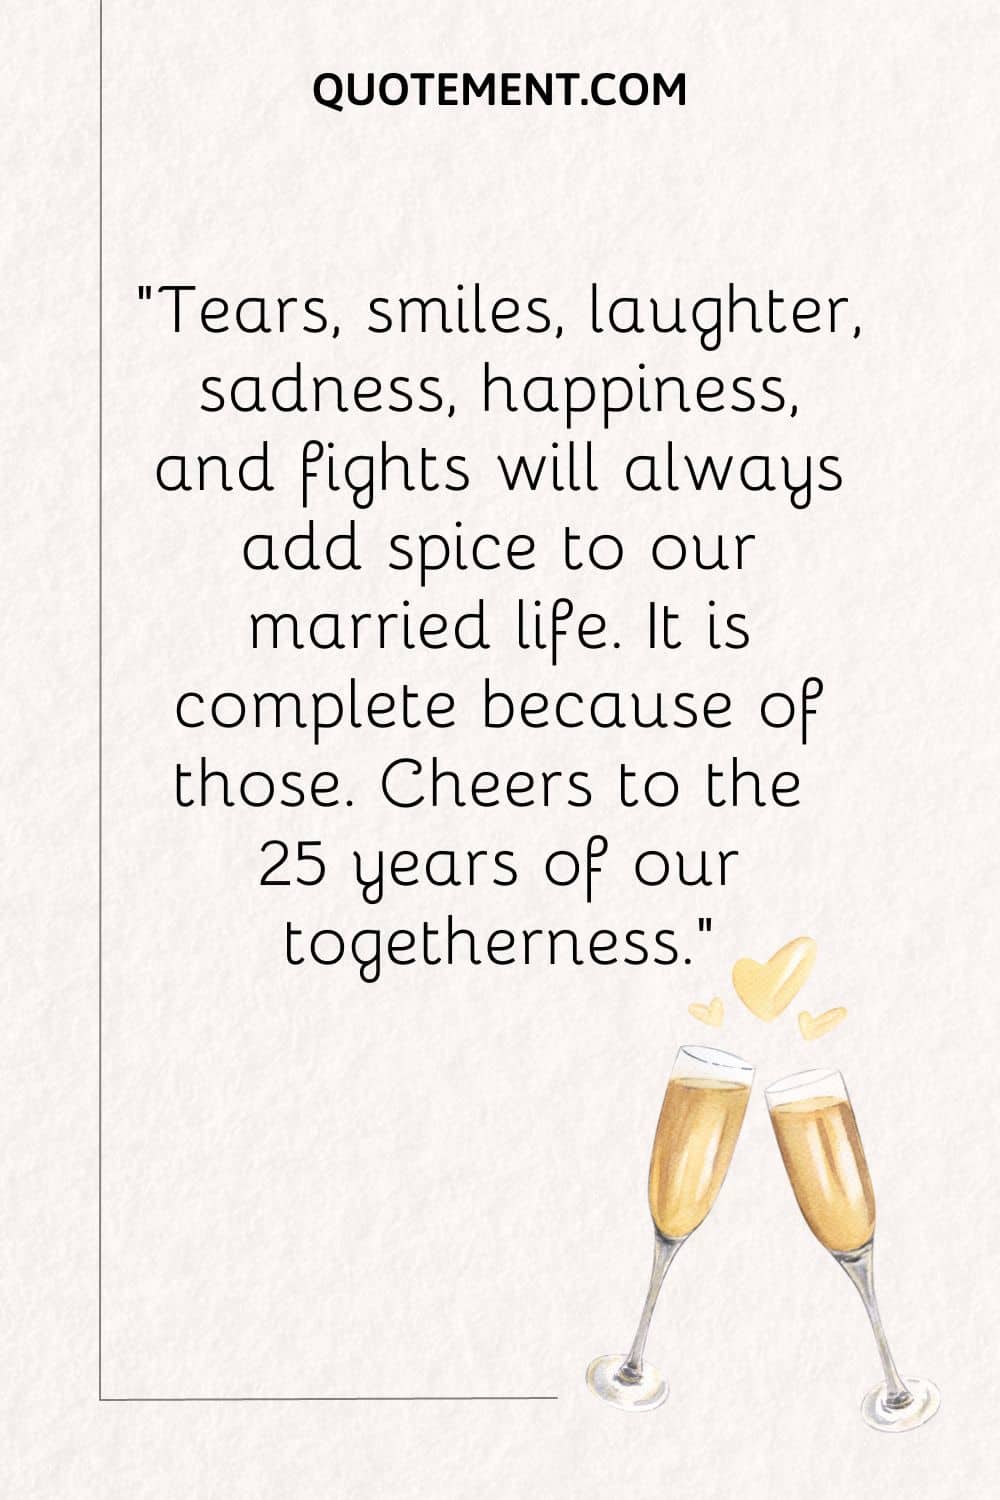 Tears, smiles, laughter, sadness, happiness, and fights will always add spice to our married life.